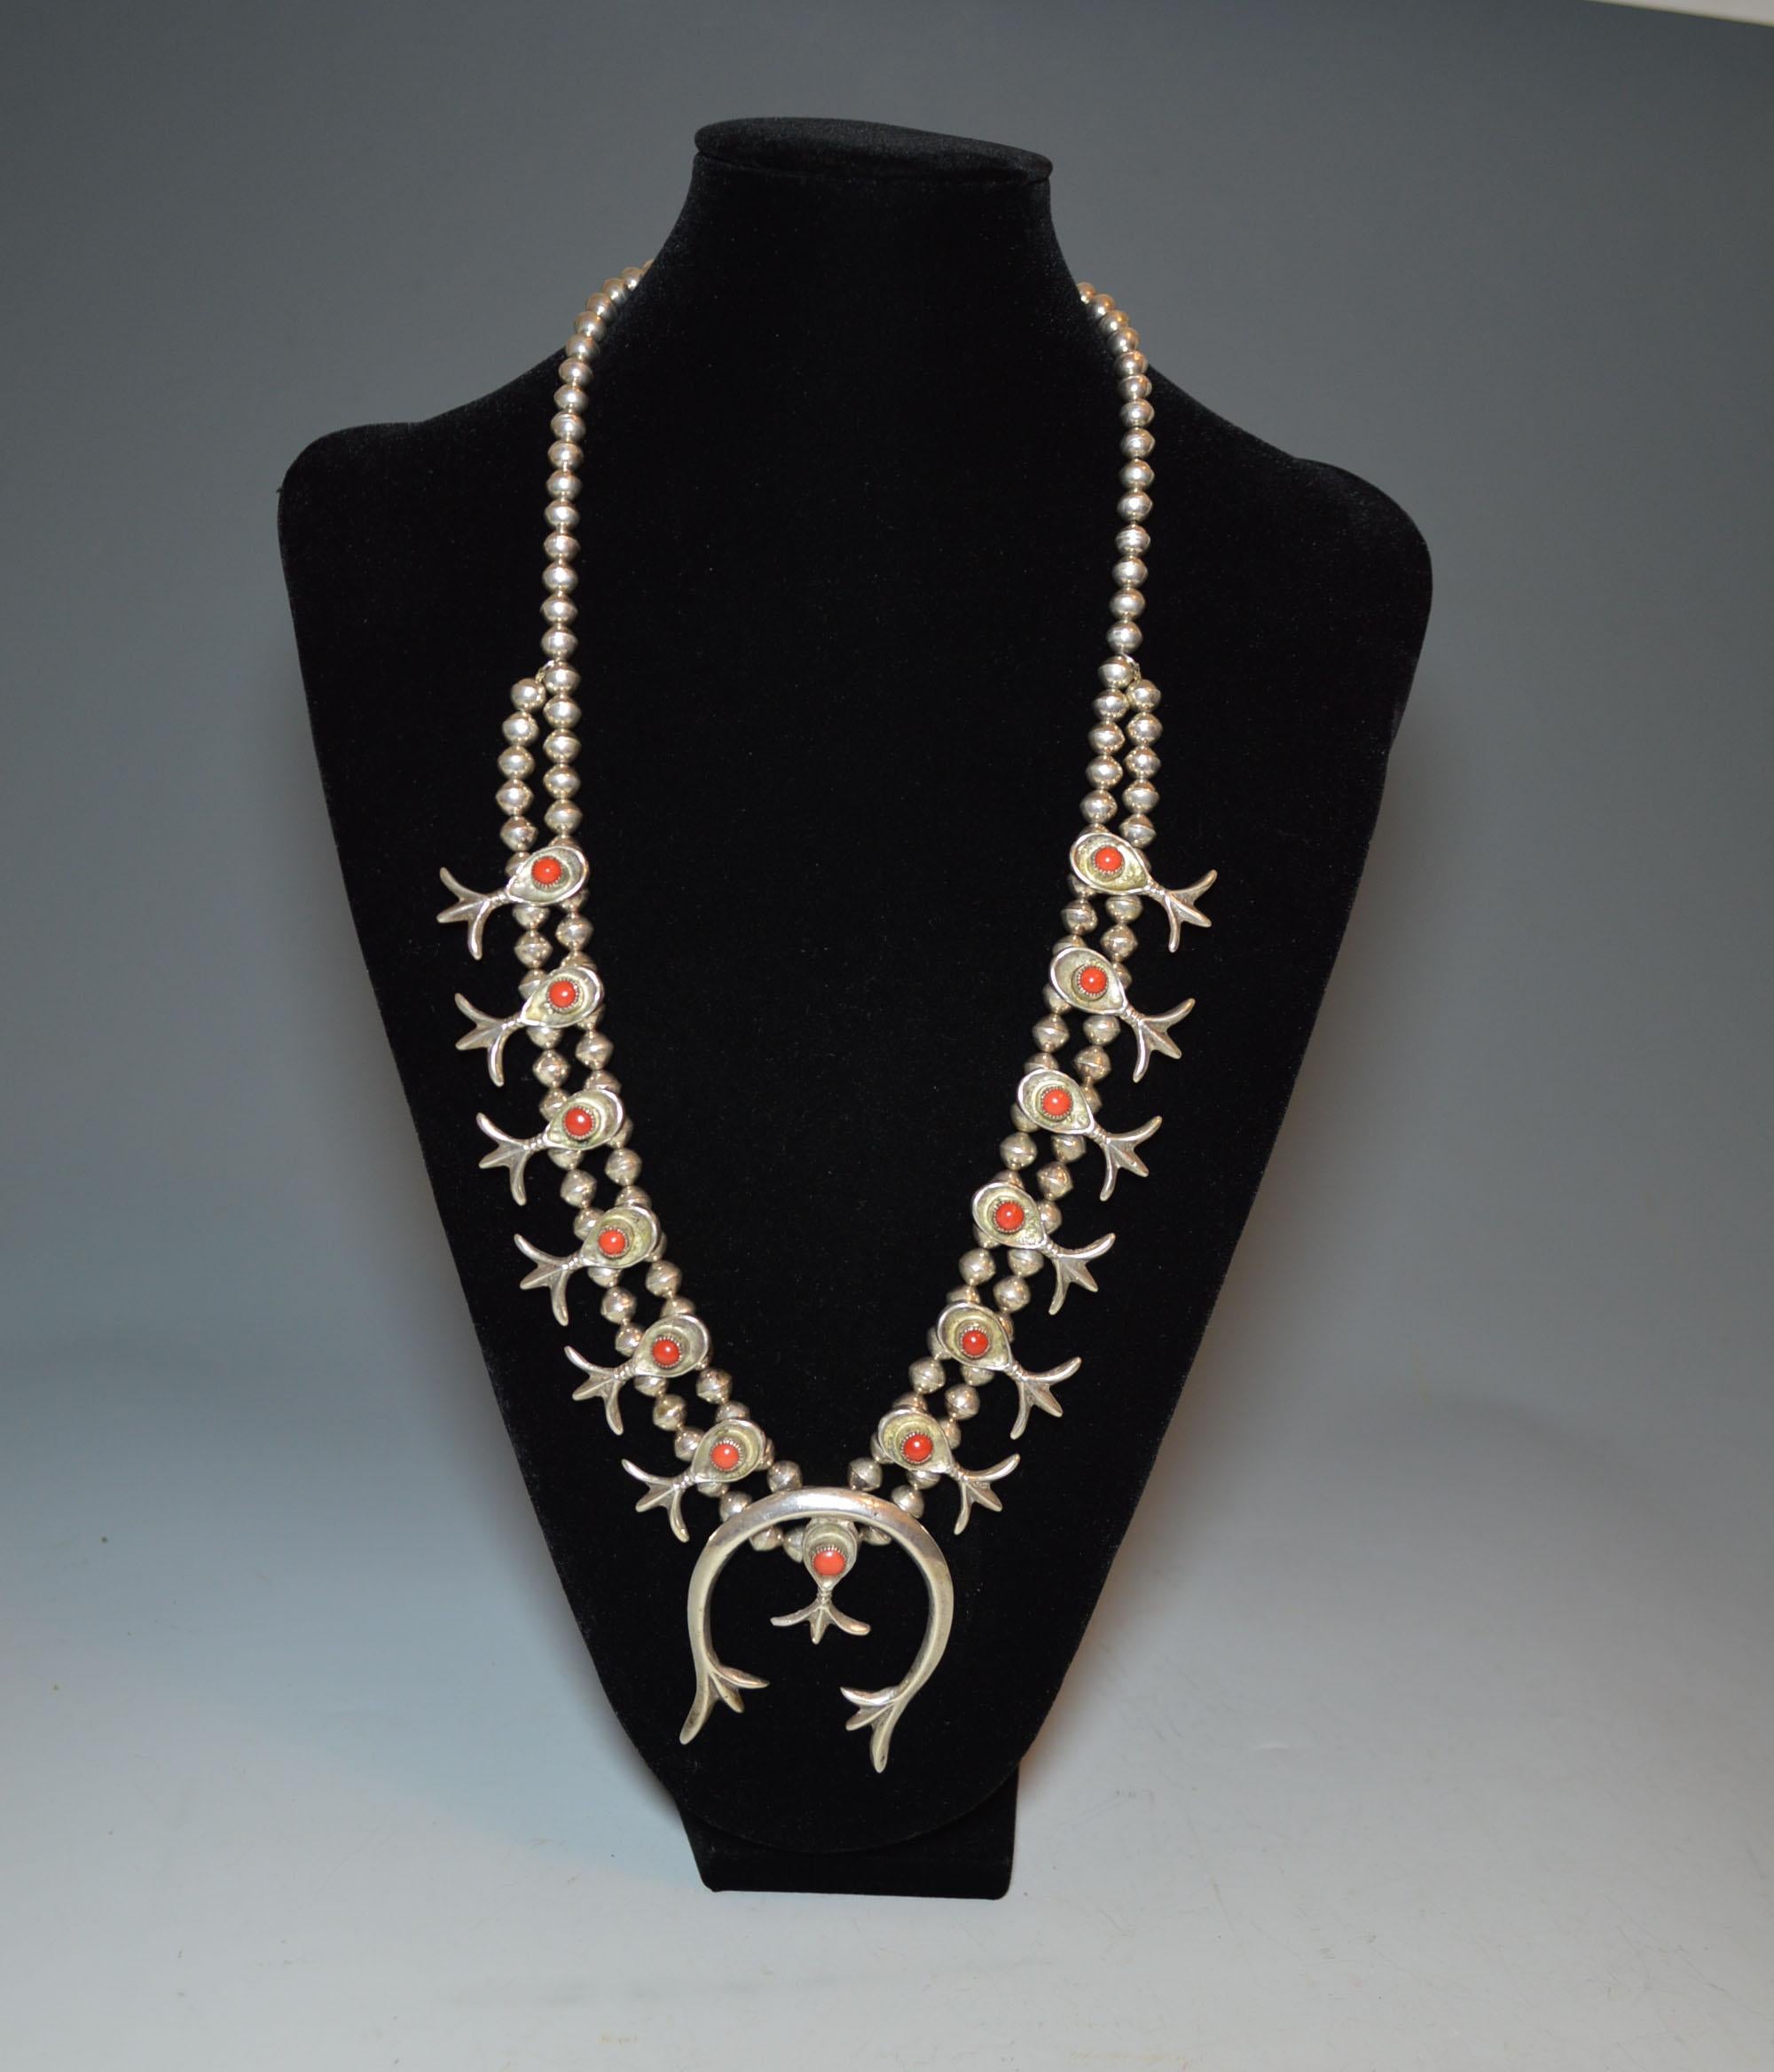 A fine vintage Native American Navajo silver and coral squash blossom necklace
Classic Navajo sterling silver squash blossom design with coral inlay
Unmarked
Size: 27 inches, 69 cm all way round, 
Period: 1950s-1960s


Size 10.5 x 9.5 cm, 4